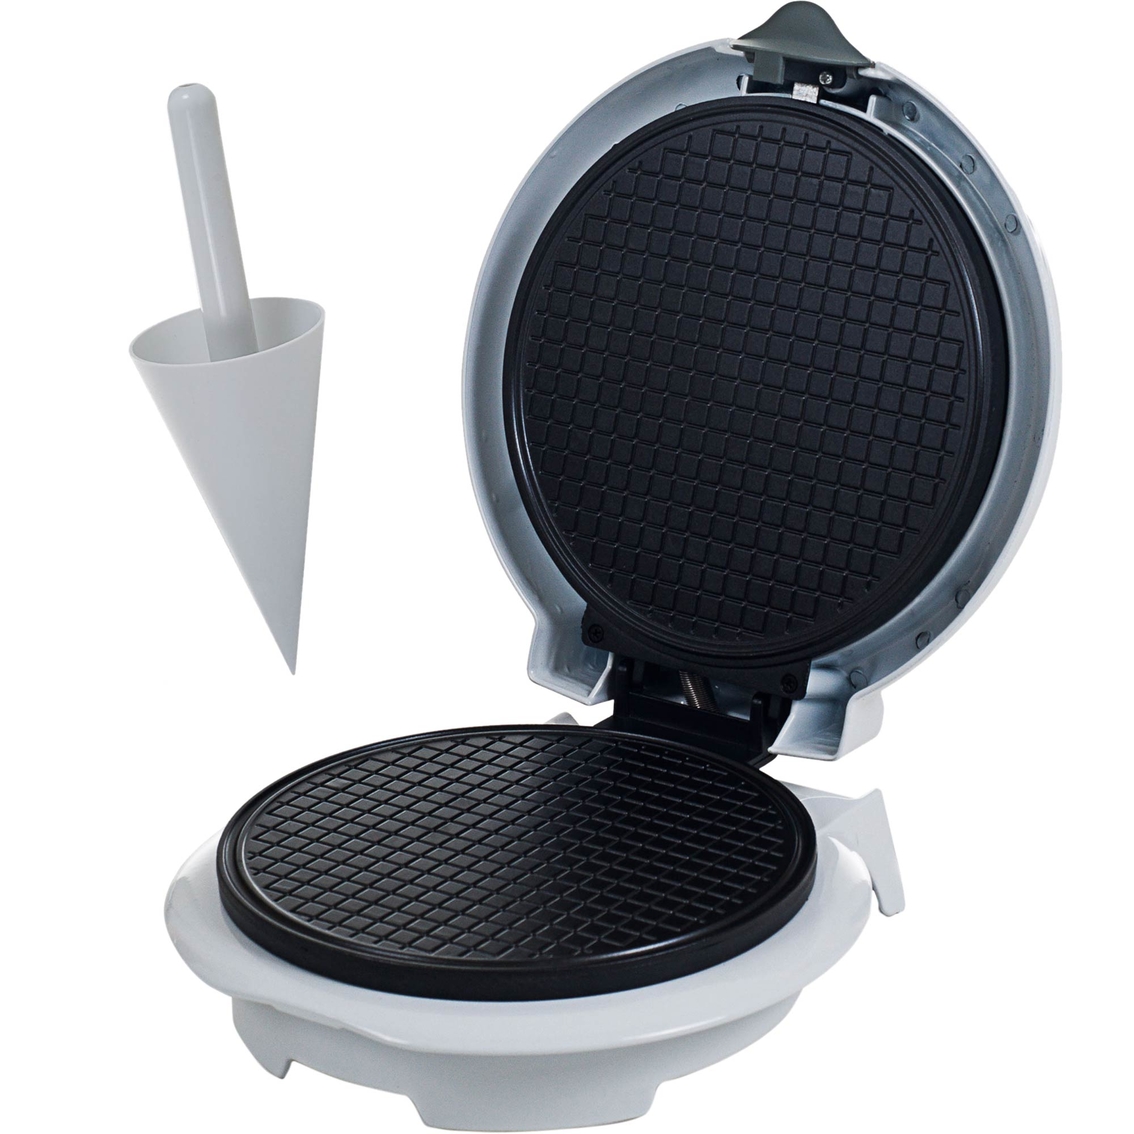 Chef Buddy Waffle Cone Maker - Image 2 of 2